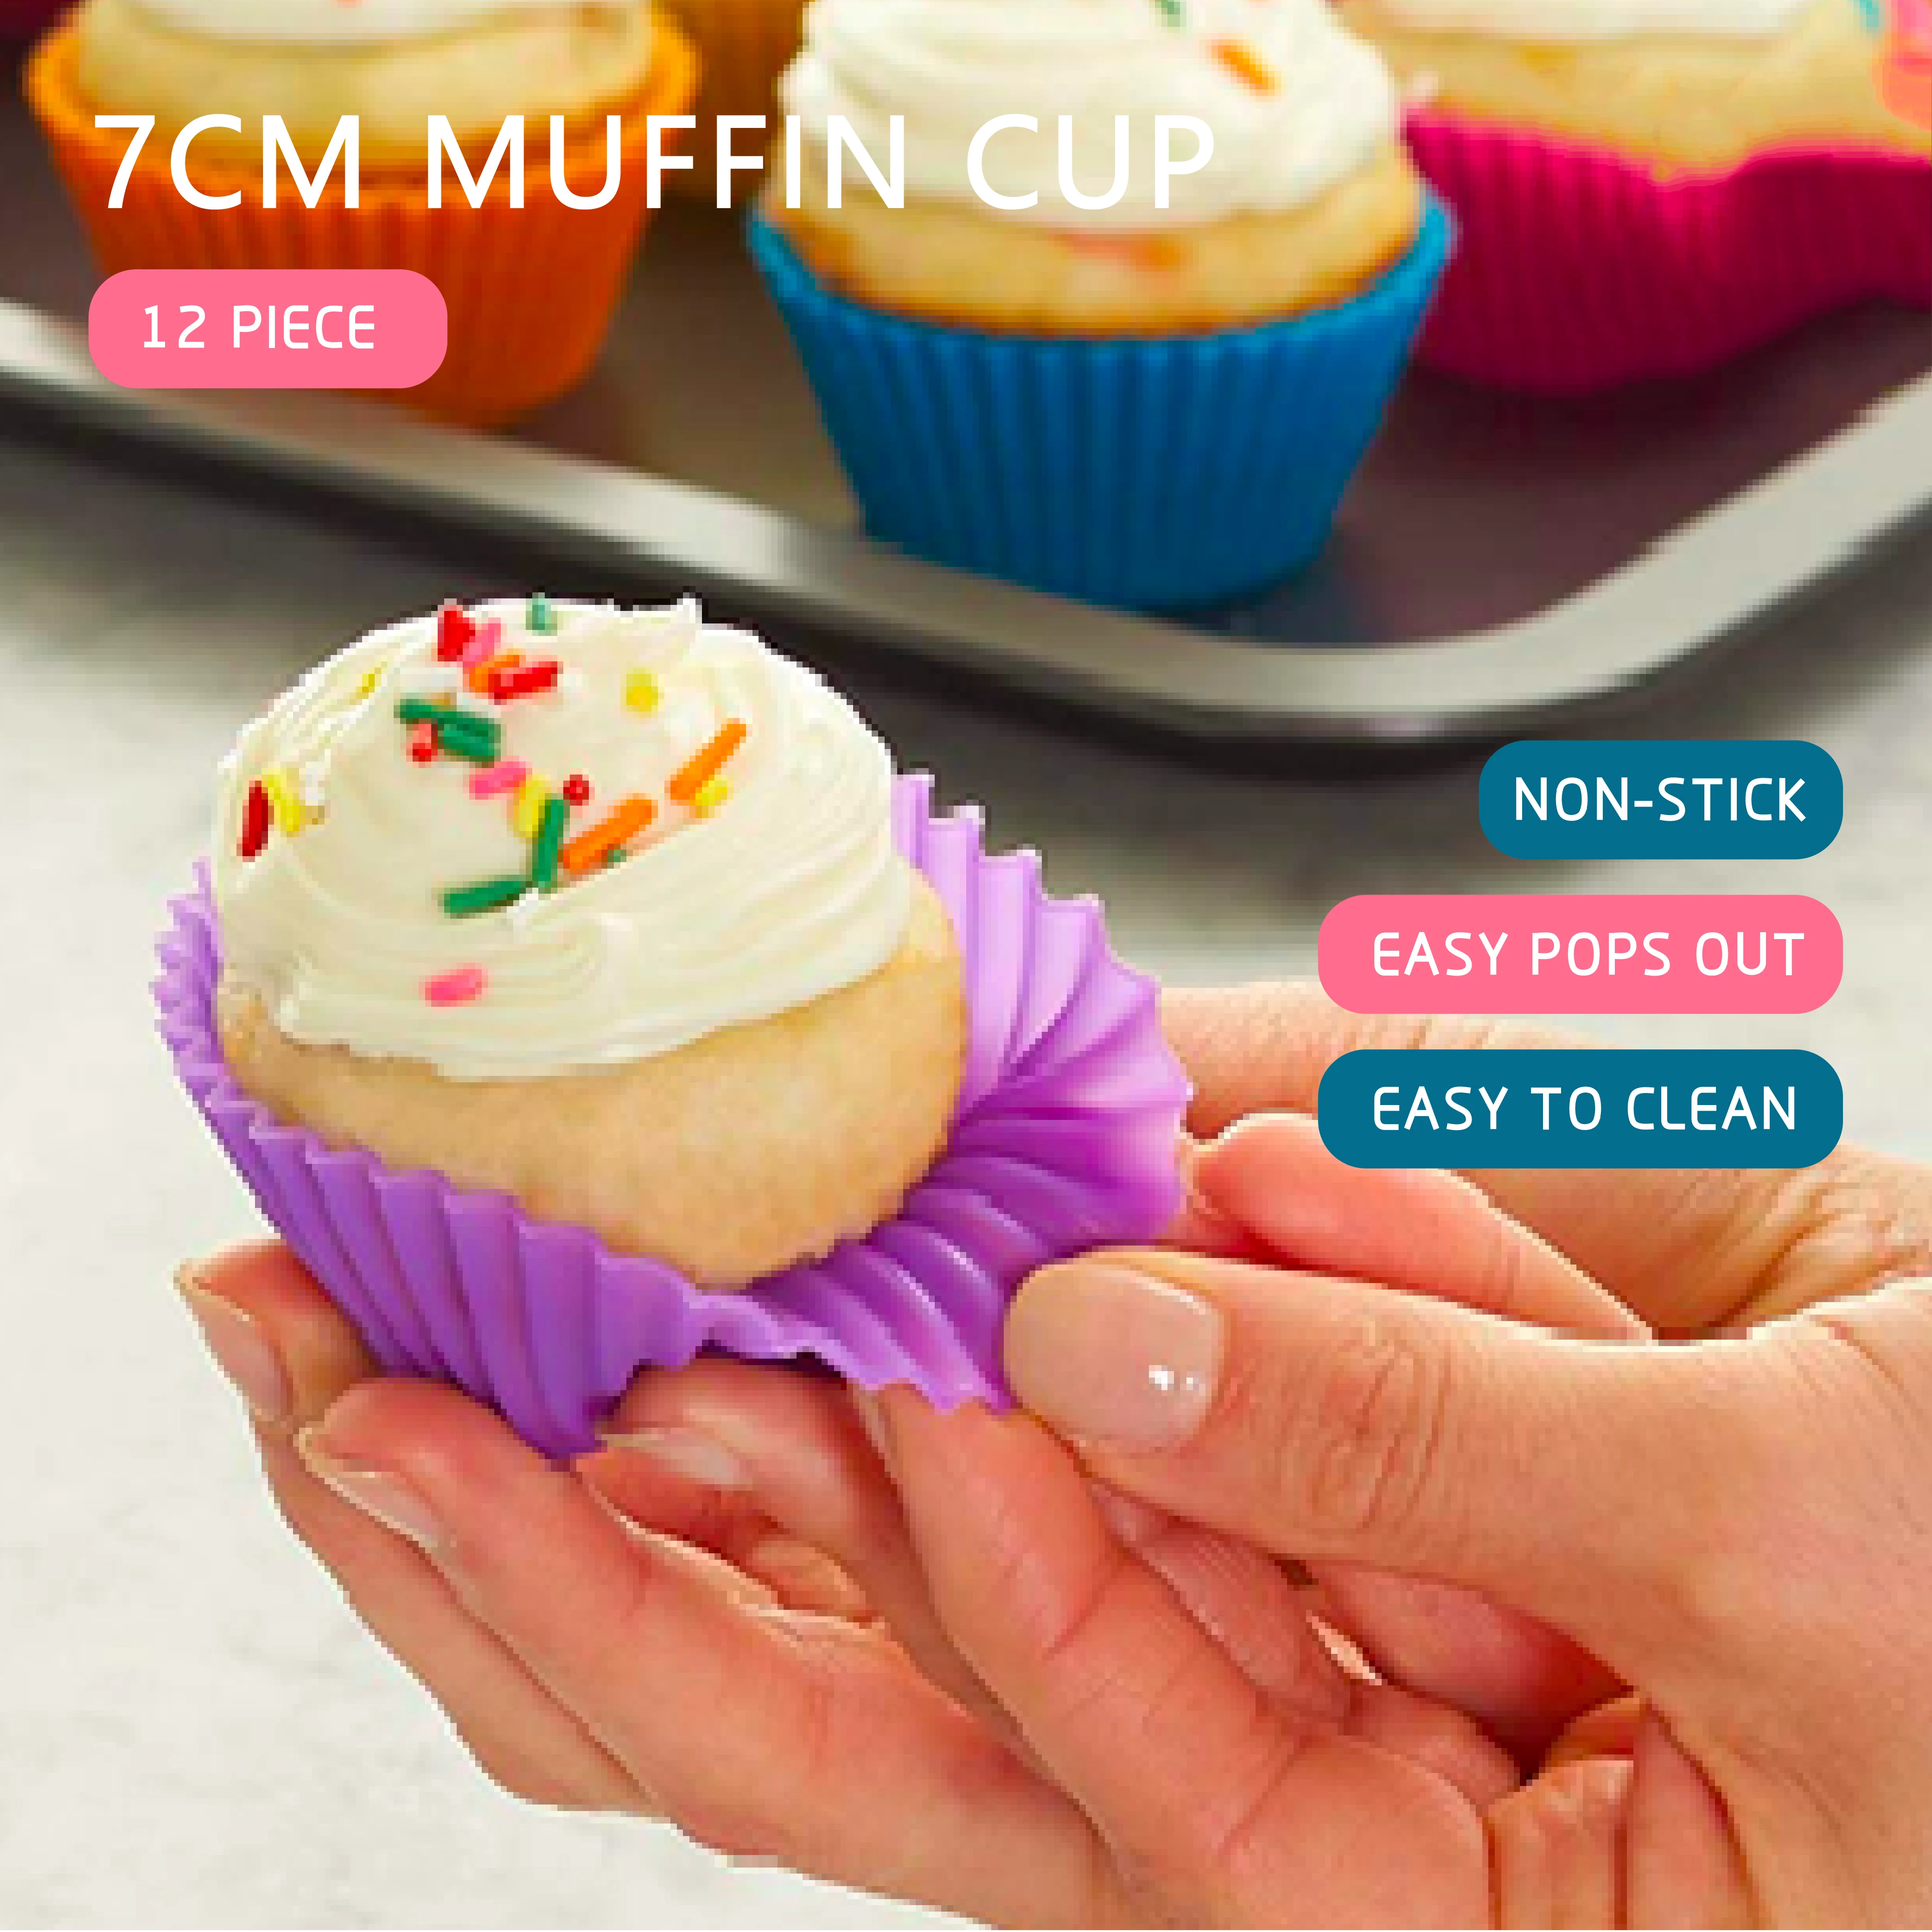 1Pc Baking Tool 9-Cavity Financier Silicone Mold French Dessert Tools Cake  Mold for Baking - AliExpress